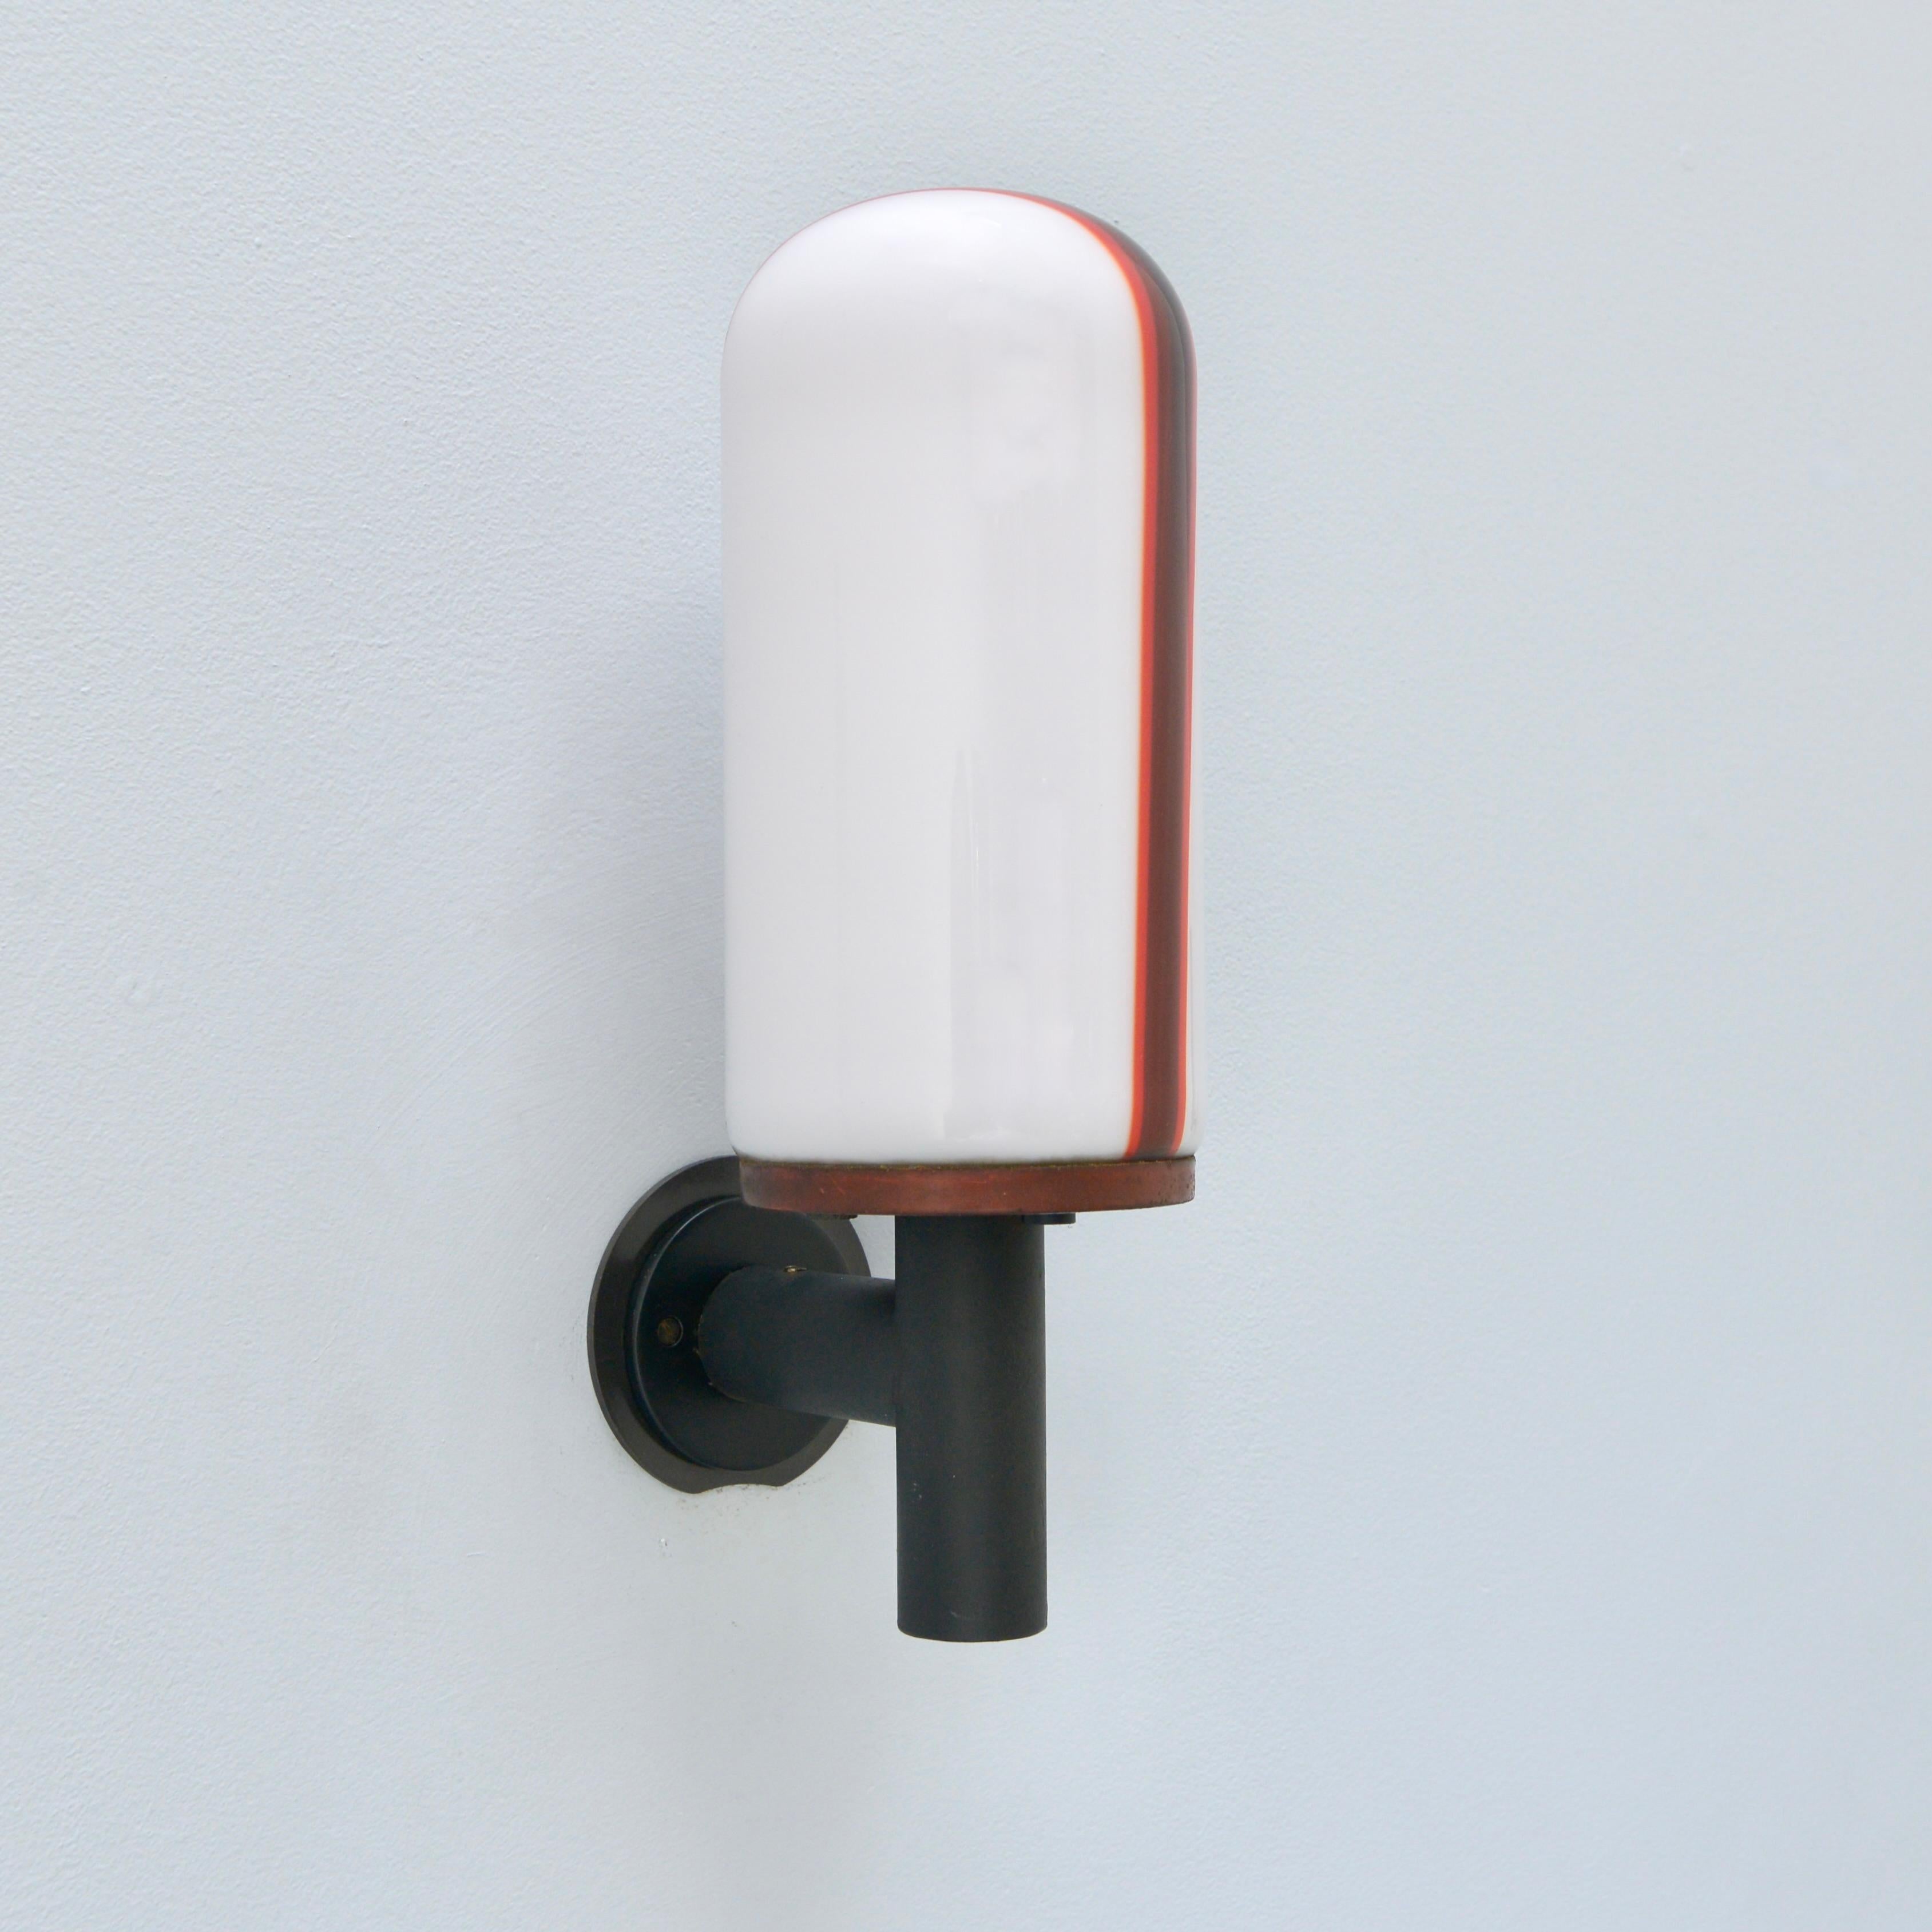 Wonderful 1950s single hand blown Italian exterior sconce by Venini. Soft white glass shade with a red and brown stripe with steel and brass hardware. Partially restored. 1 E26 medium based socket for use in the USA. It can also be wired for use